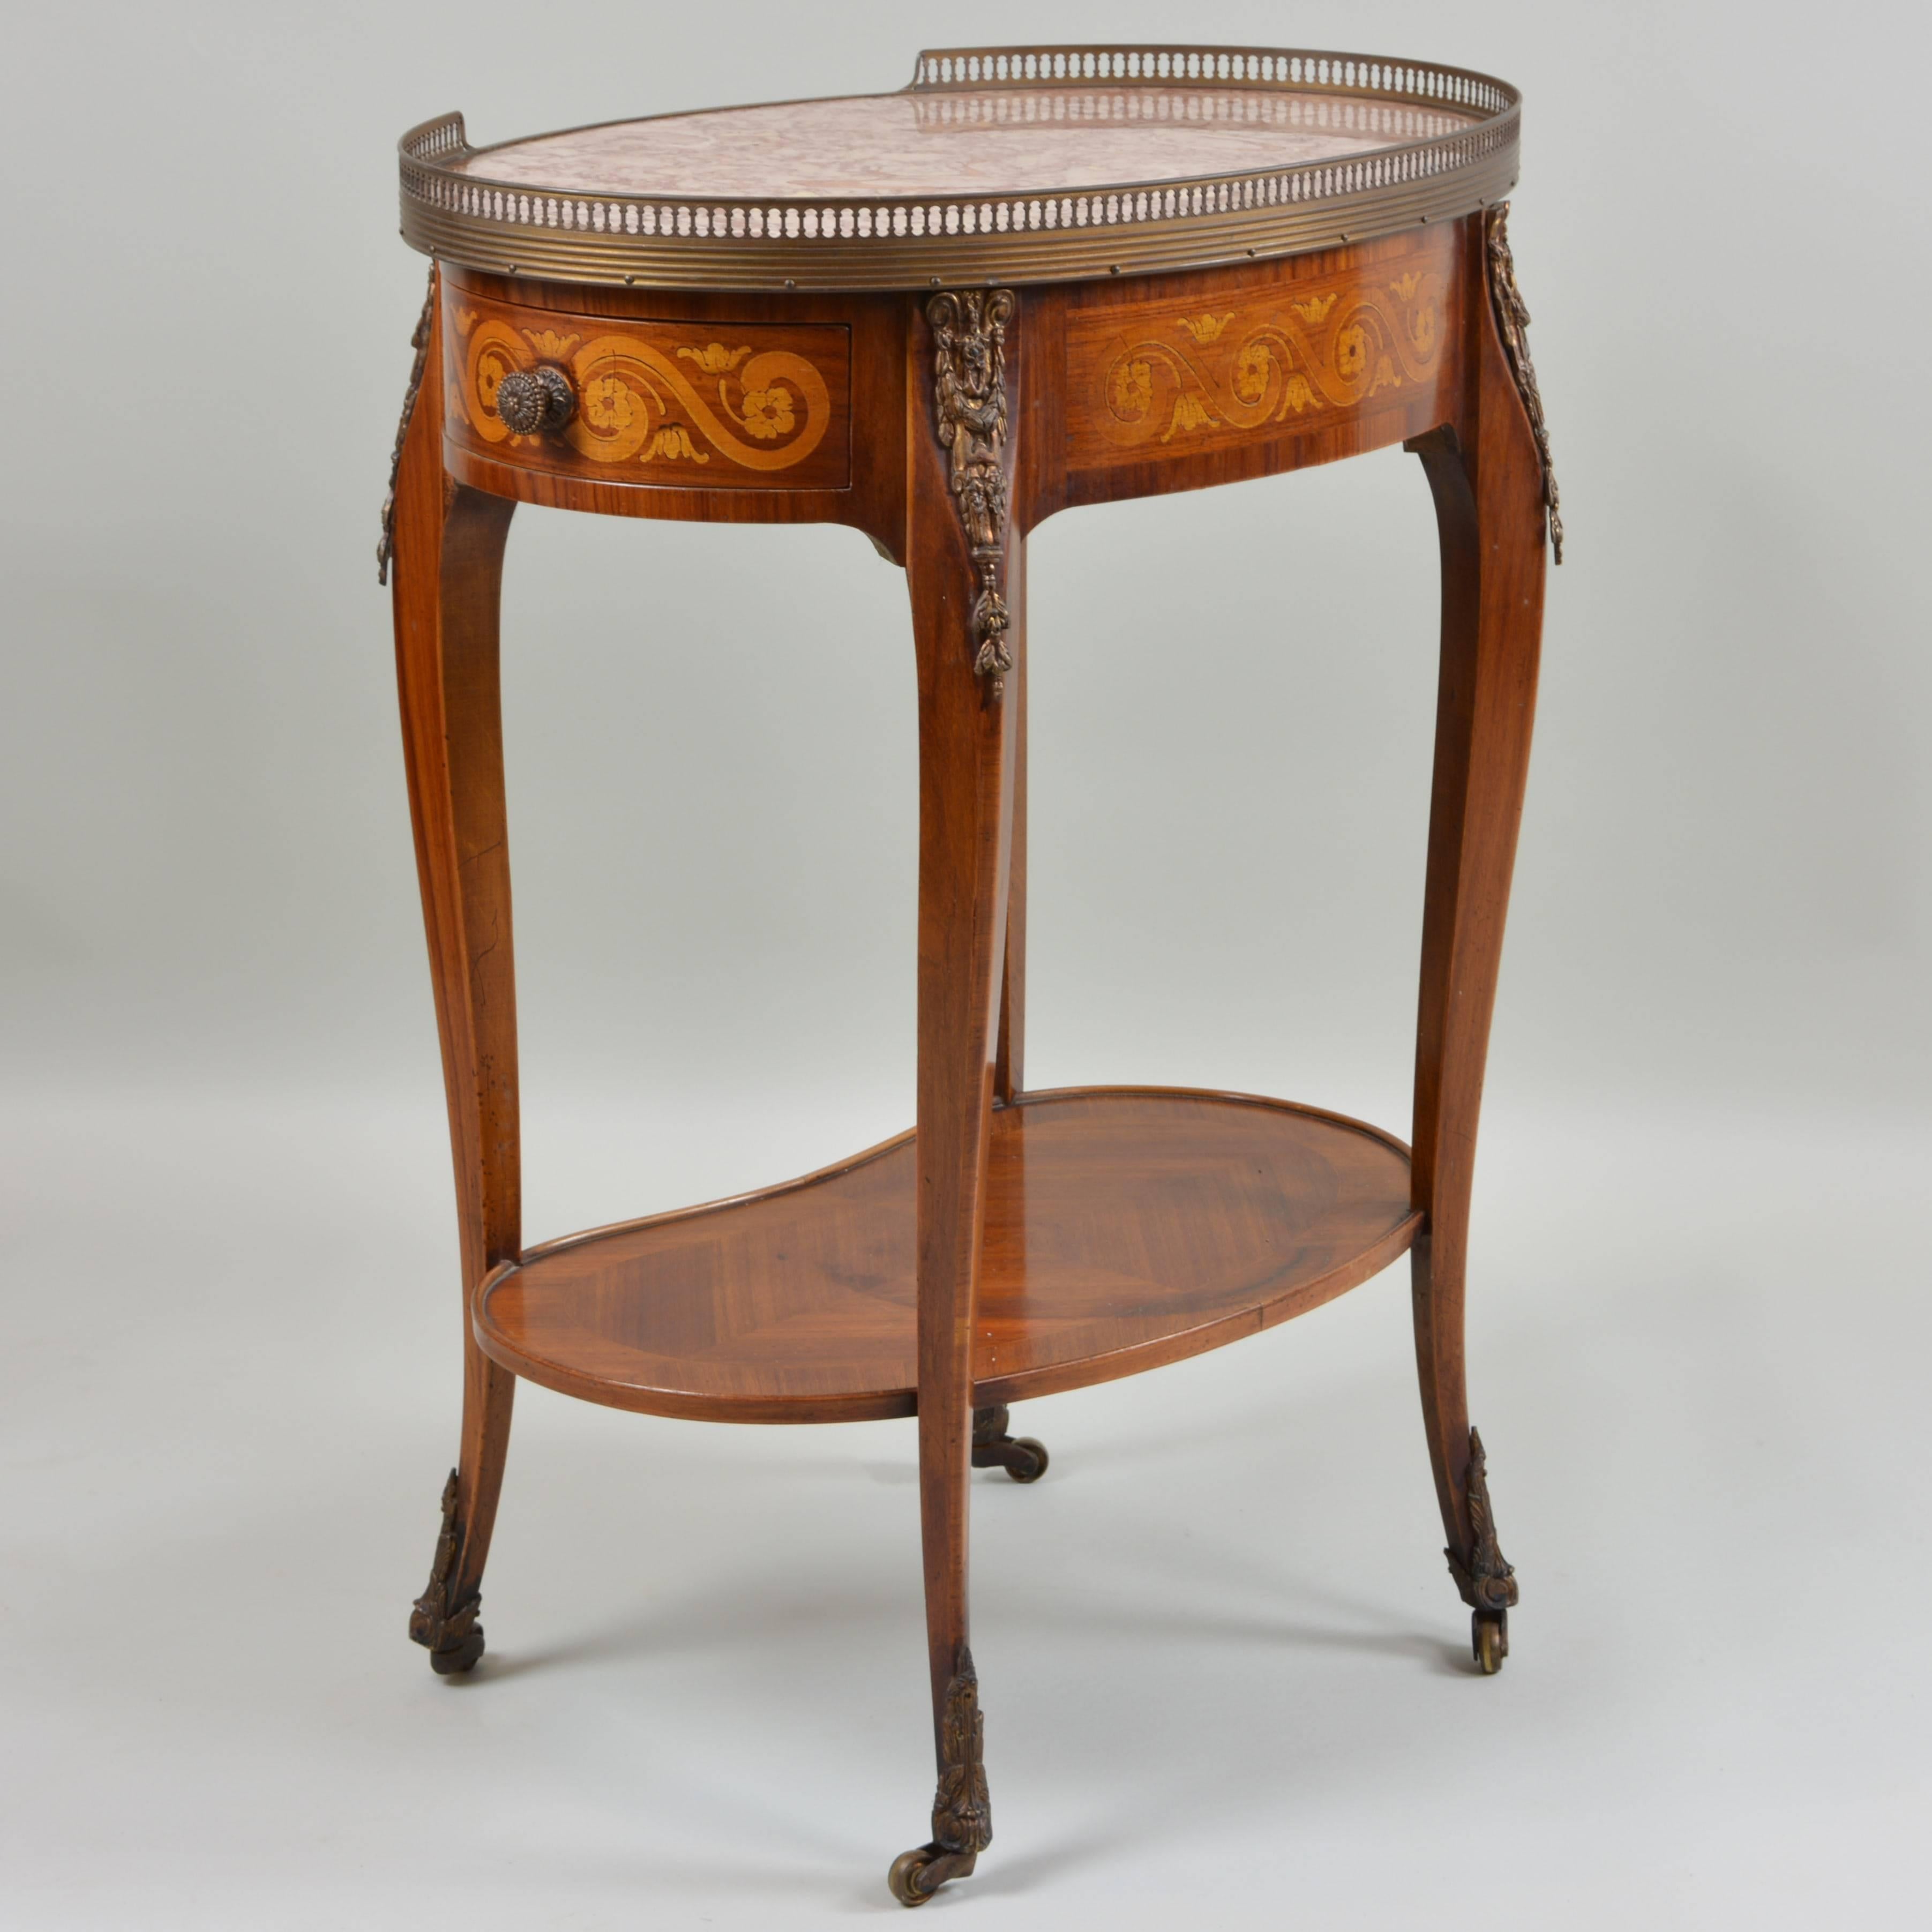 We call this our "Kidney Table" because of the uniquely shaped undershelf that presumably gives clearance for a domestic staff member's legs. Its gorgeous oval top appears to be crafted of native Rouge des Pyrenees quarried marble from